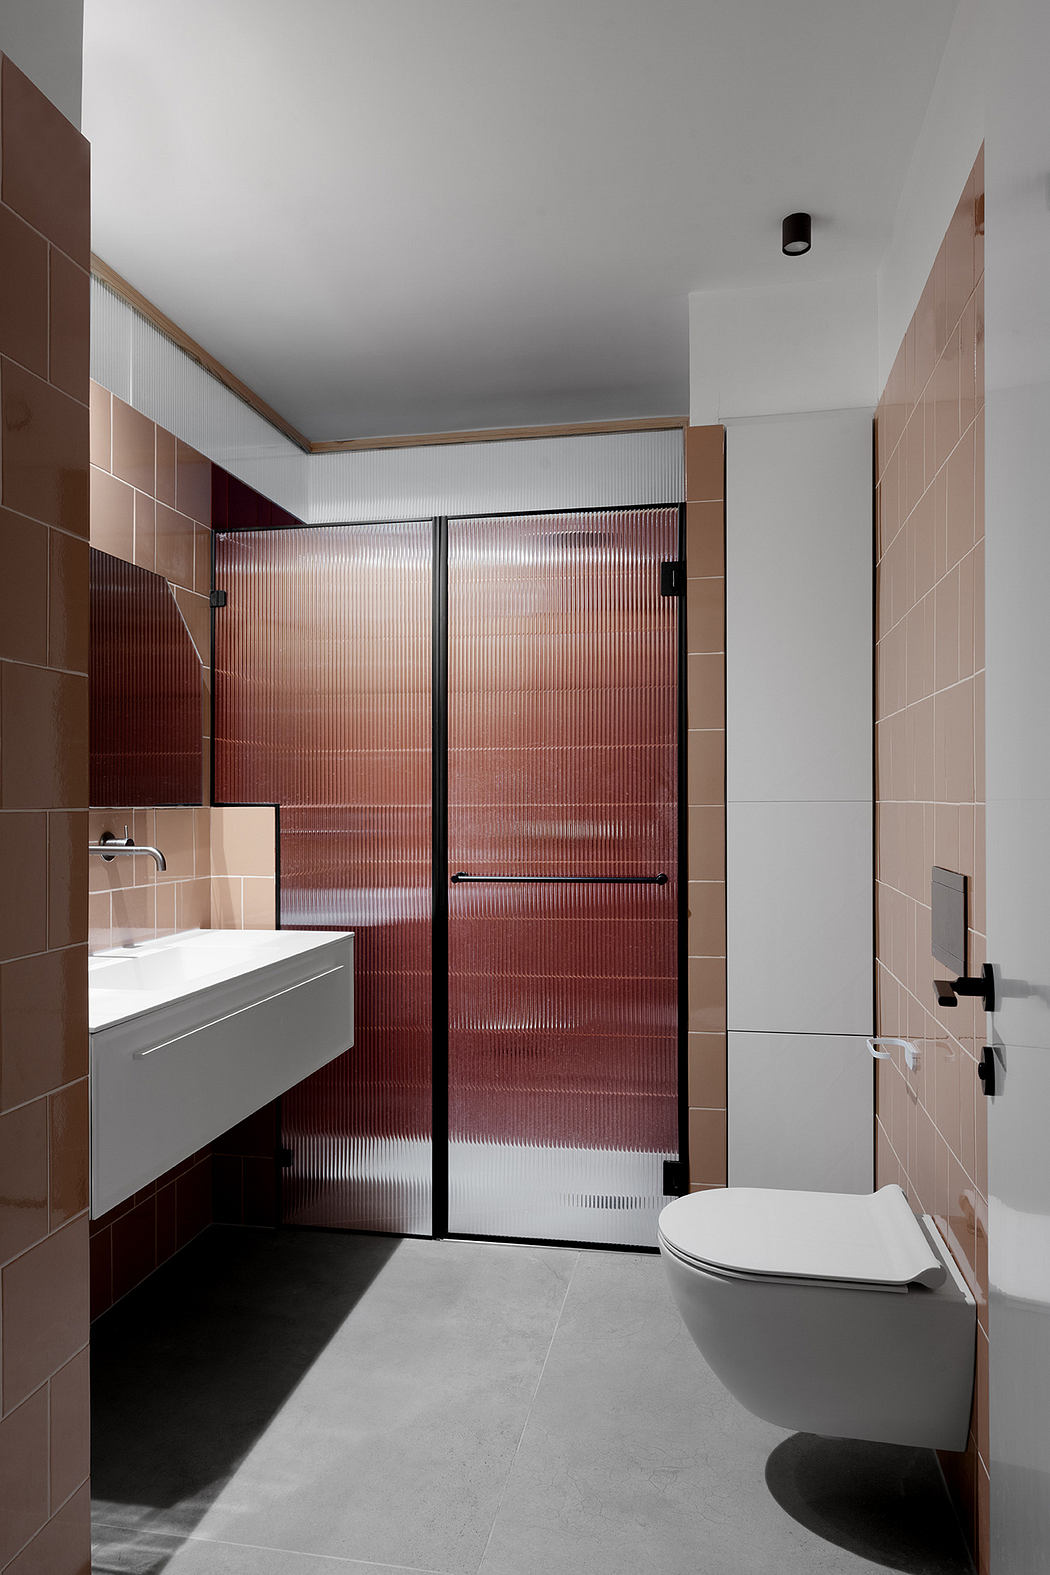 Modern bathroom with terracotta tiles, white fixtures, and glass shower.